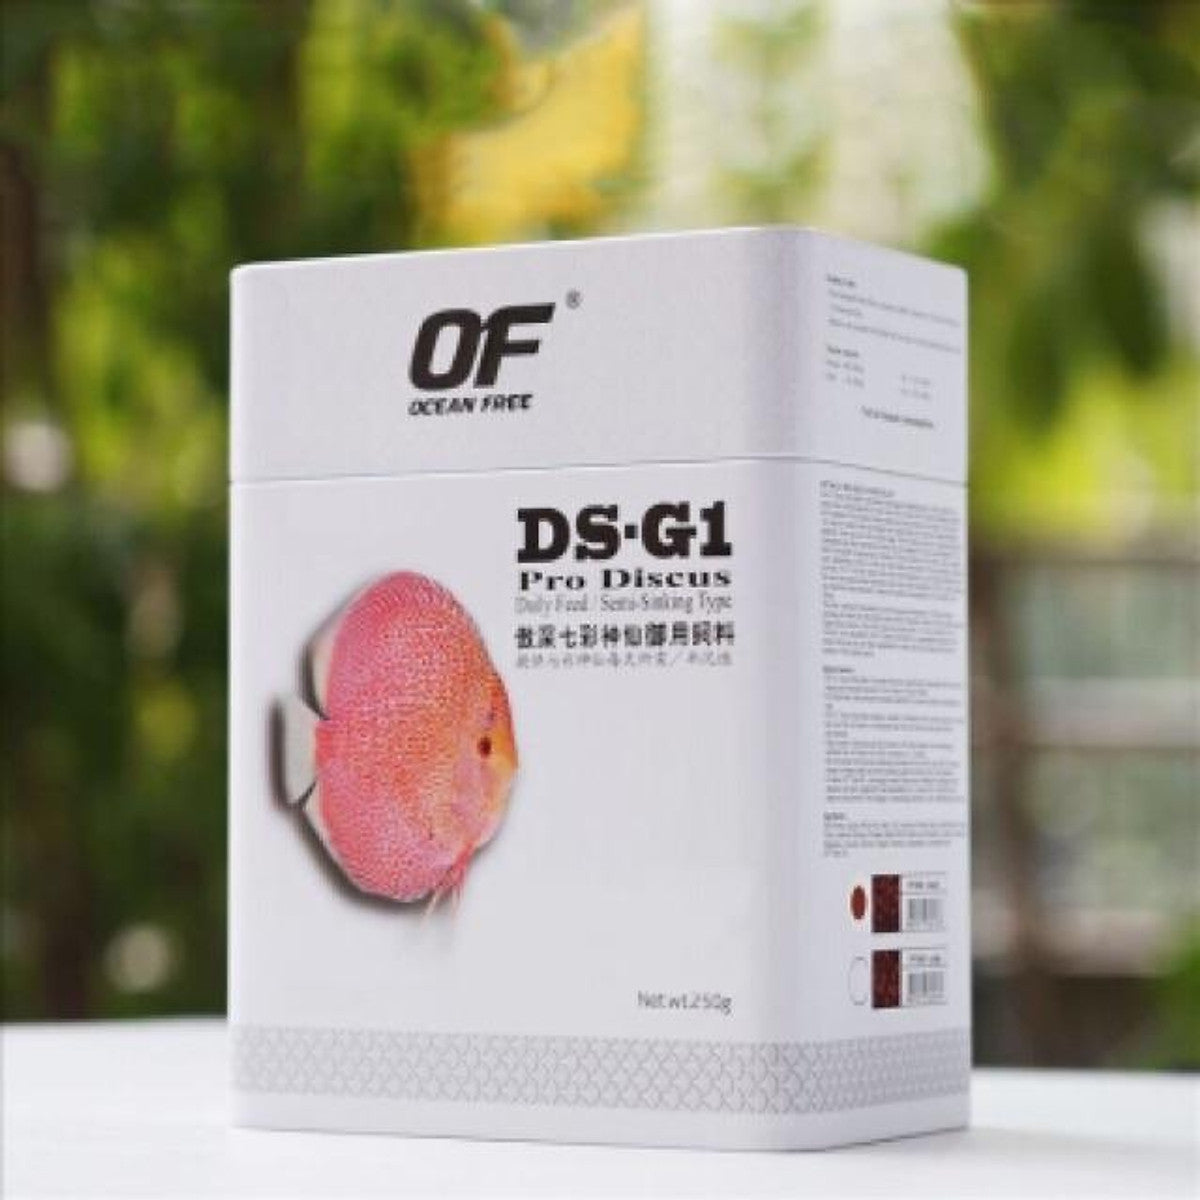 Ocean Free DS-G1 Pro Discus (Original) Fish Food, 120G | Daily Feed/Semi-Sinking Type